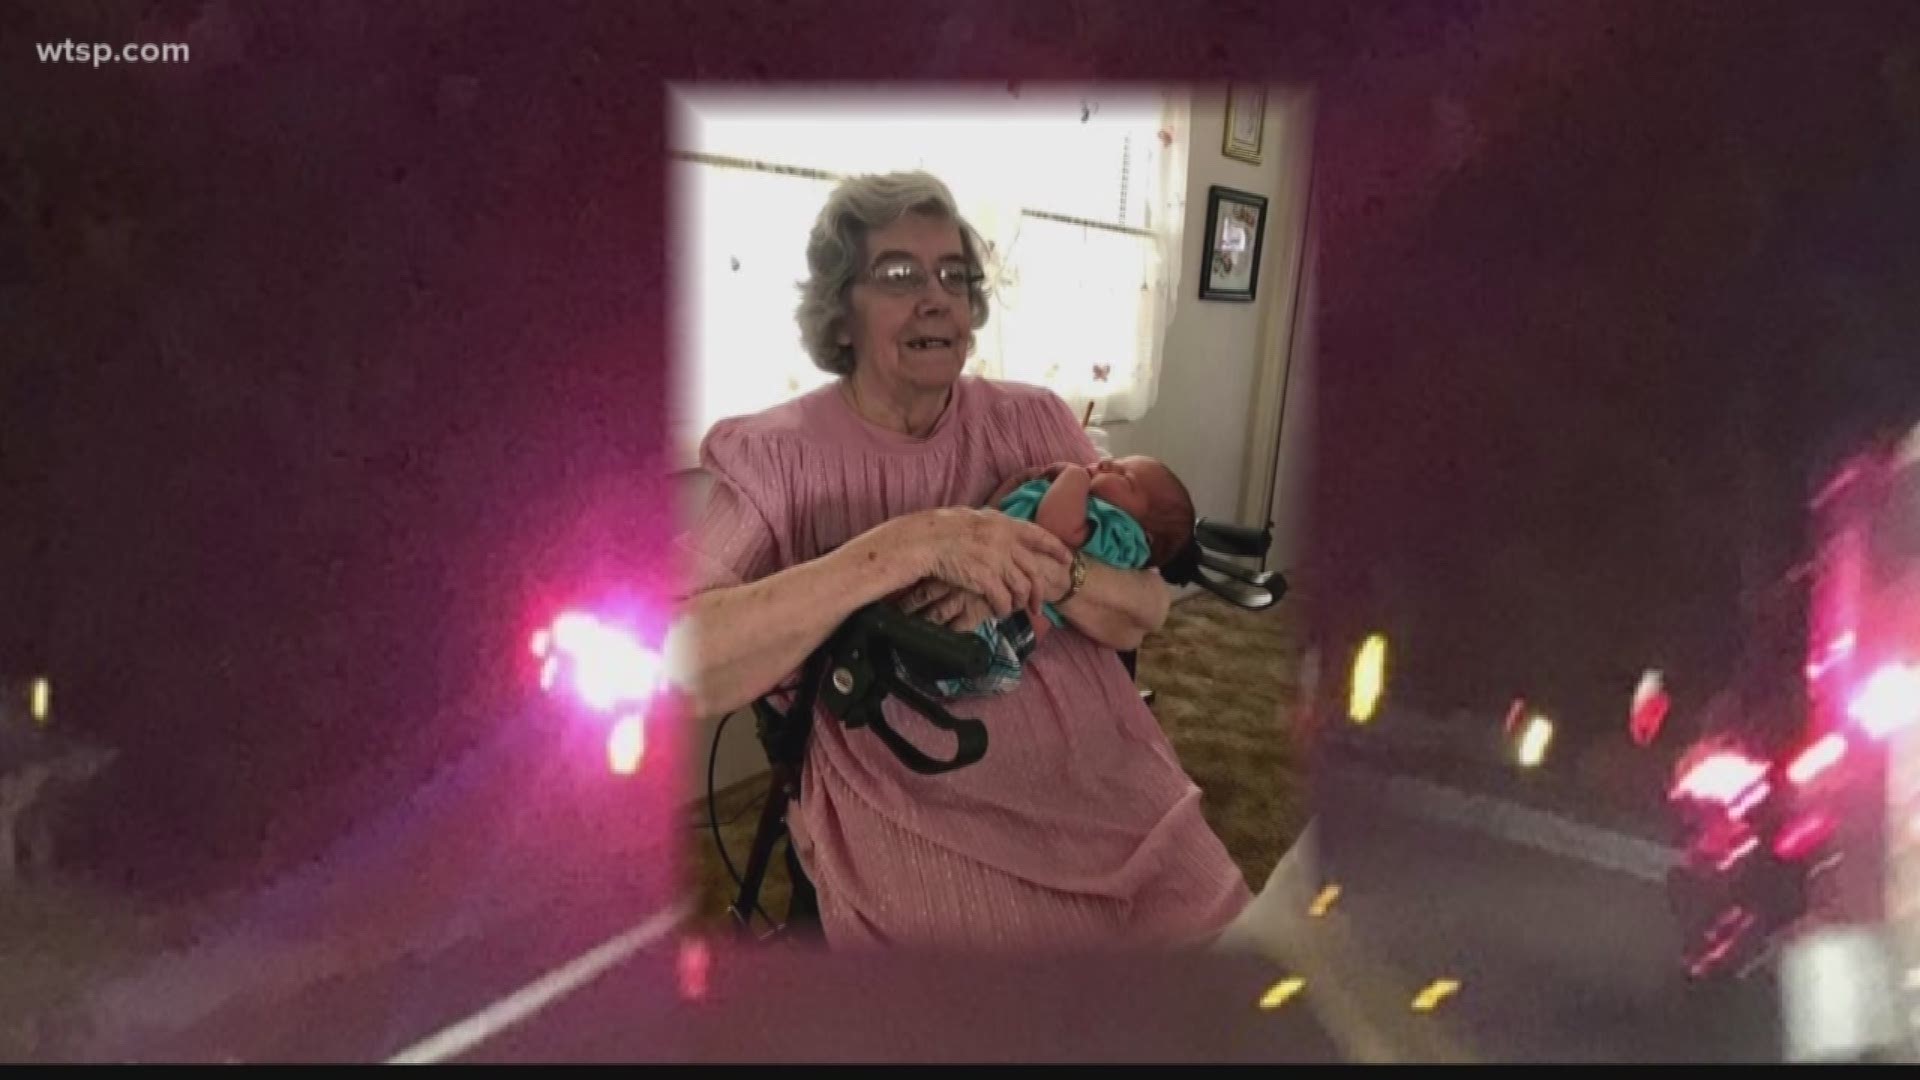 A Polk County Fire Rescue captain has been suspended for sending out images from what turned out to be the scene of a deadly fire on Snapchat. Now, relatives of the woman who died in that fire say the department should’ve been doing more to save the 76-year-old woman.